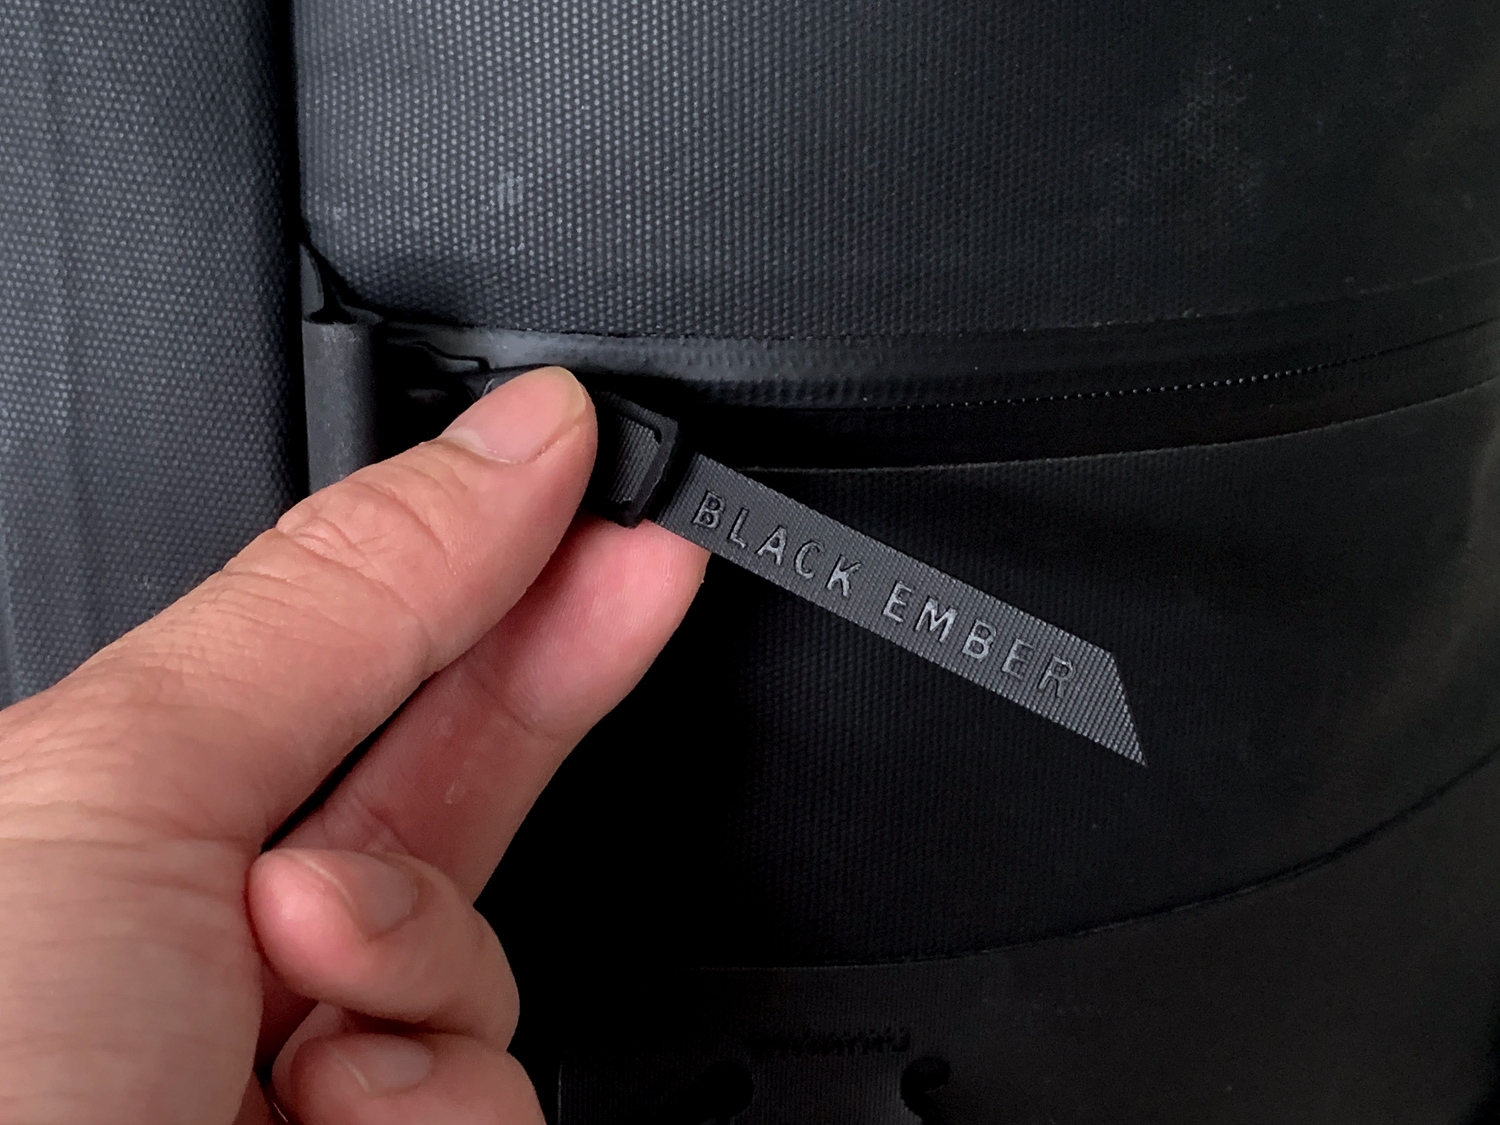 Black Ember takes the black minimalist backpack to the next level with black-on-black branding on the zipper pulls.